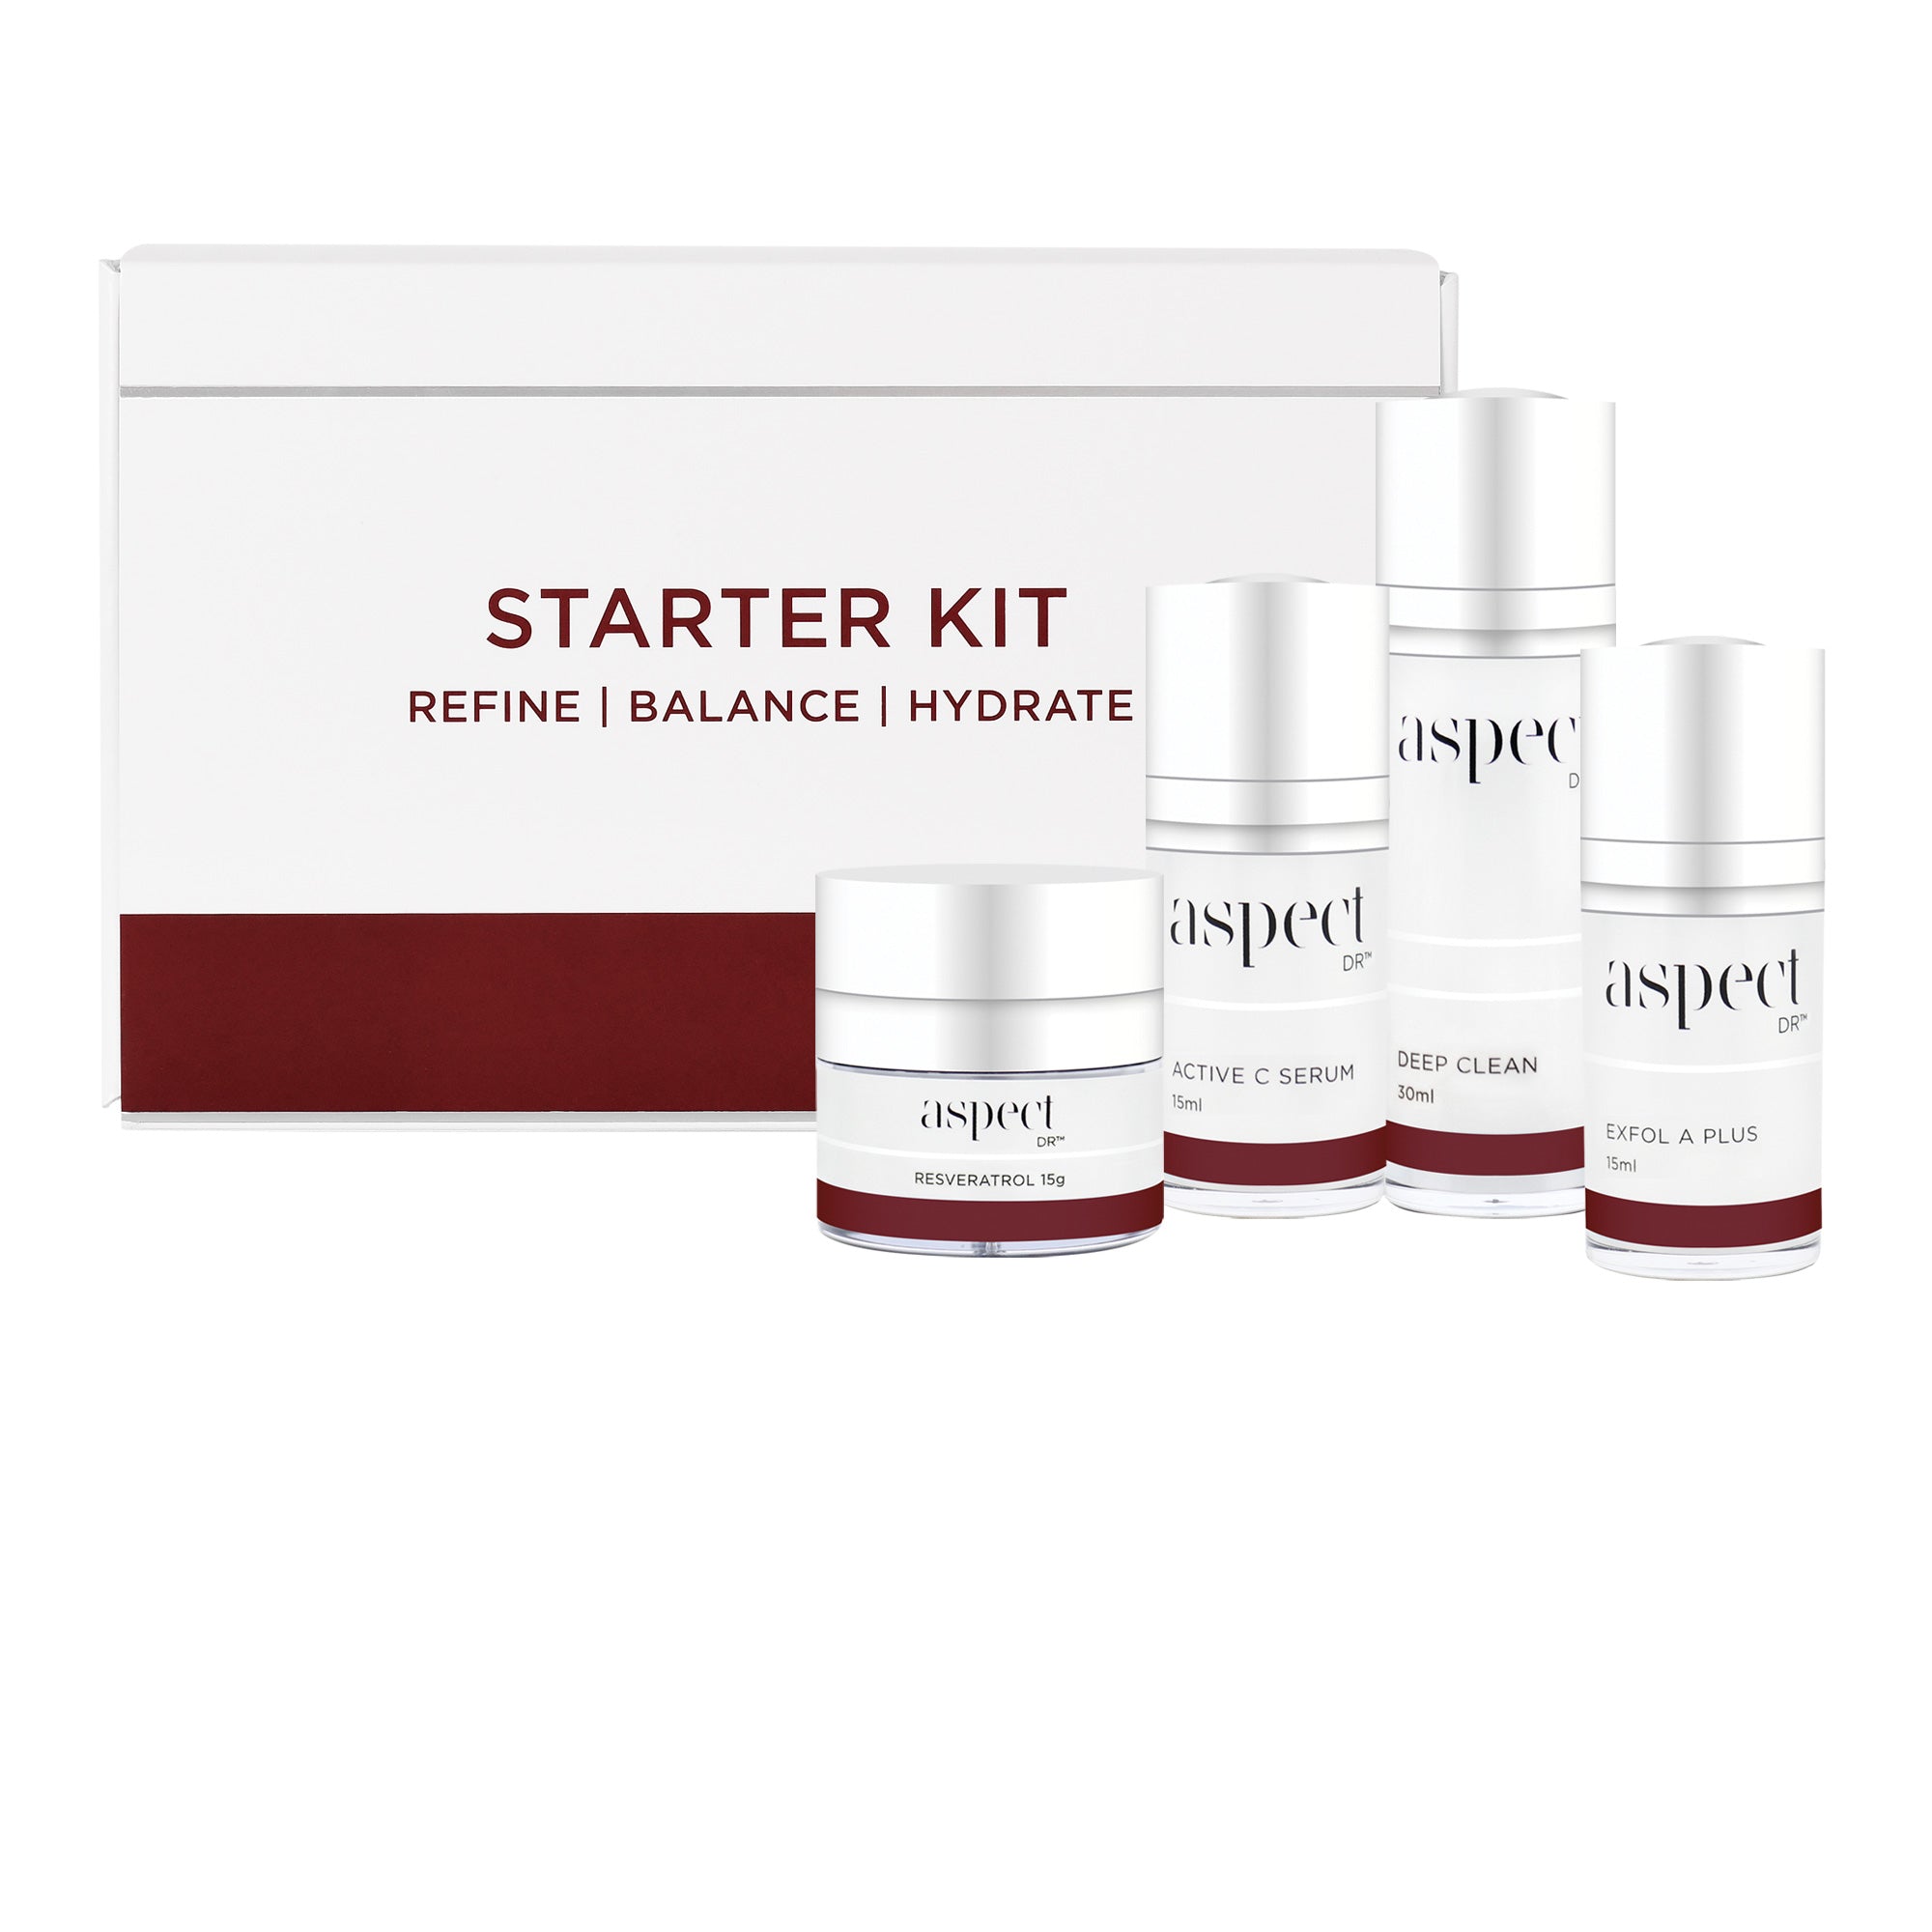 Starter Kit Aspect Dr with products